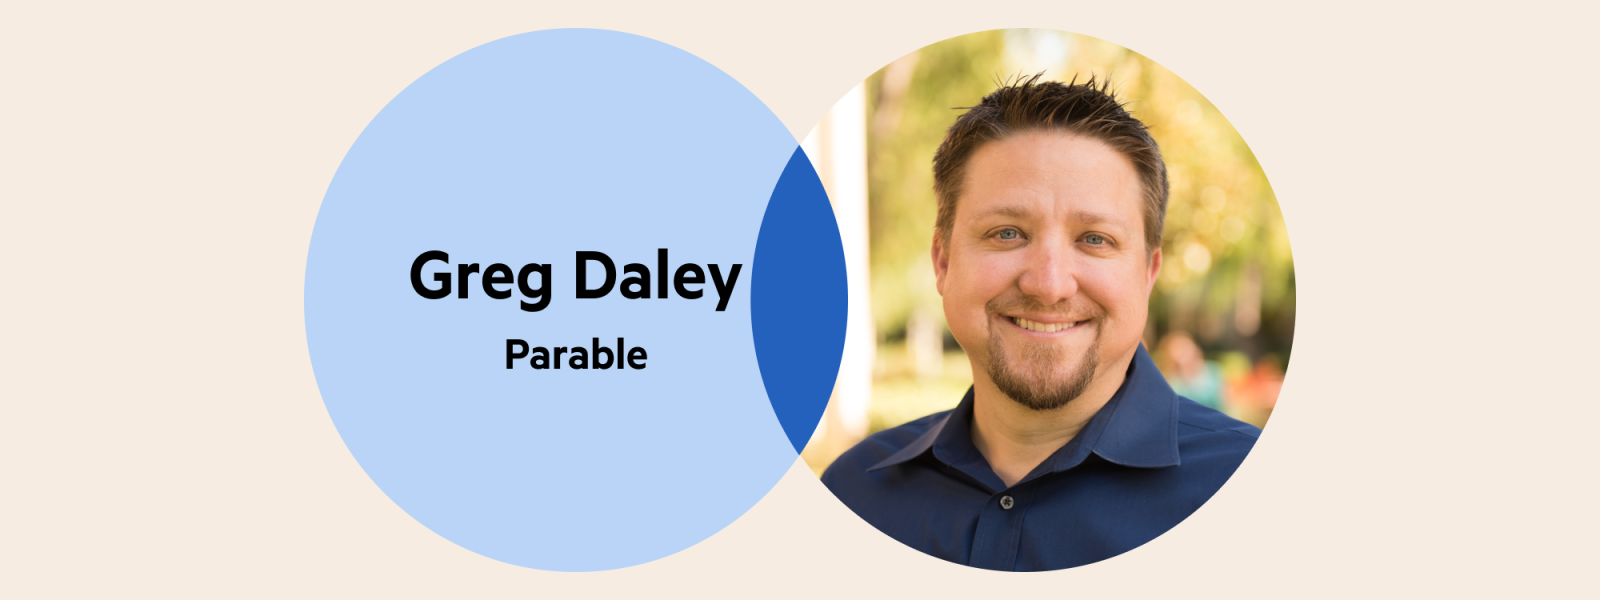 A Venn diagram. The left circle is pale blue with the words 'Greg Daley, Parable' and the right circle is Greg's headshot. The overlap of the circles is a dark blue.